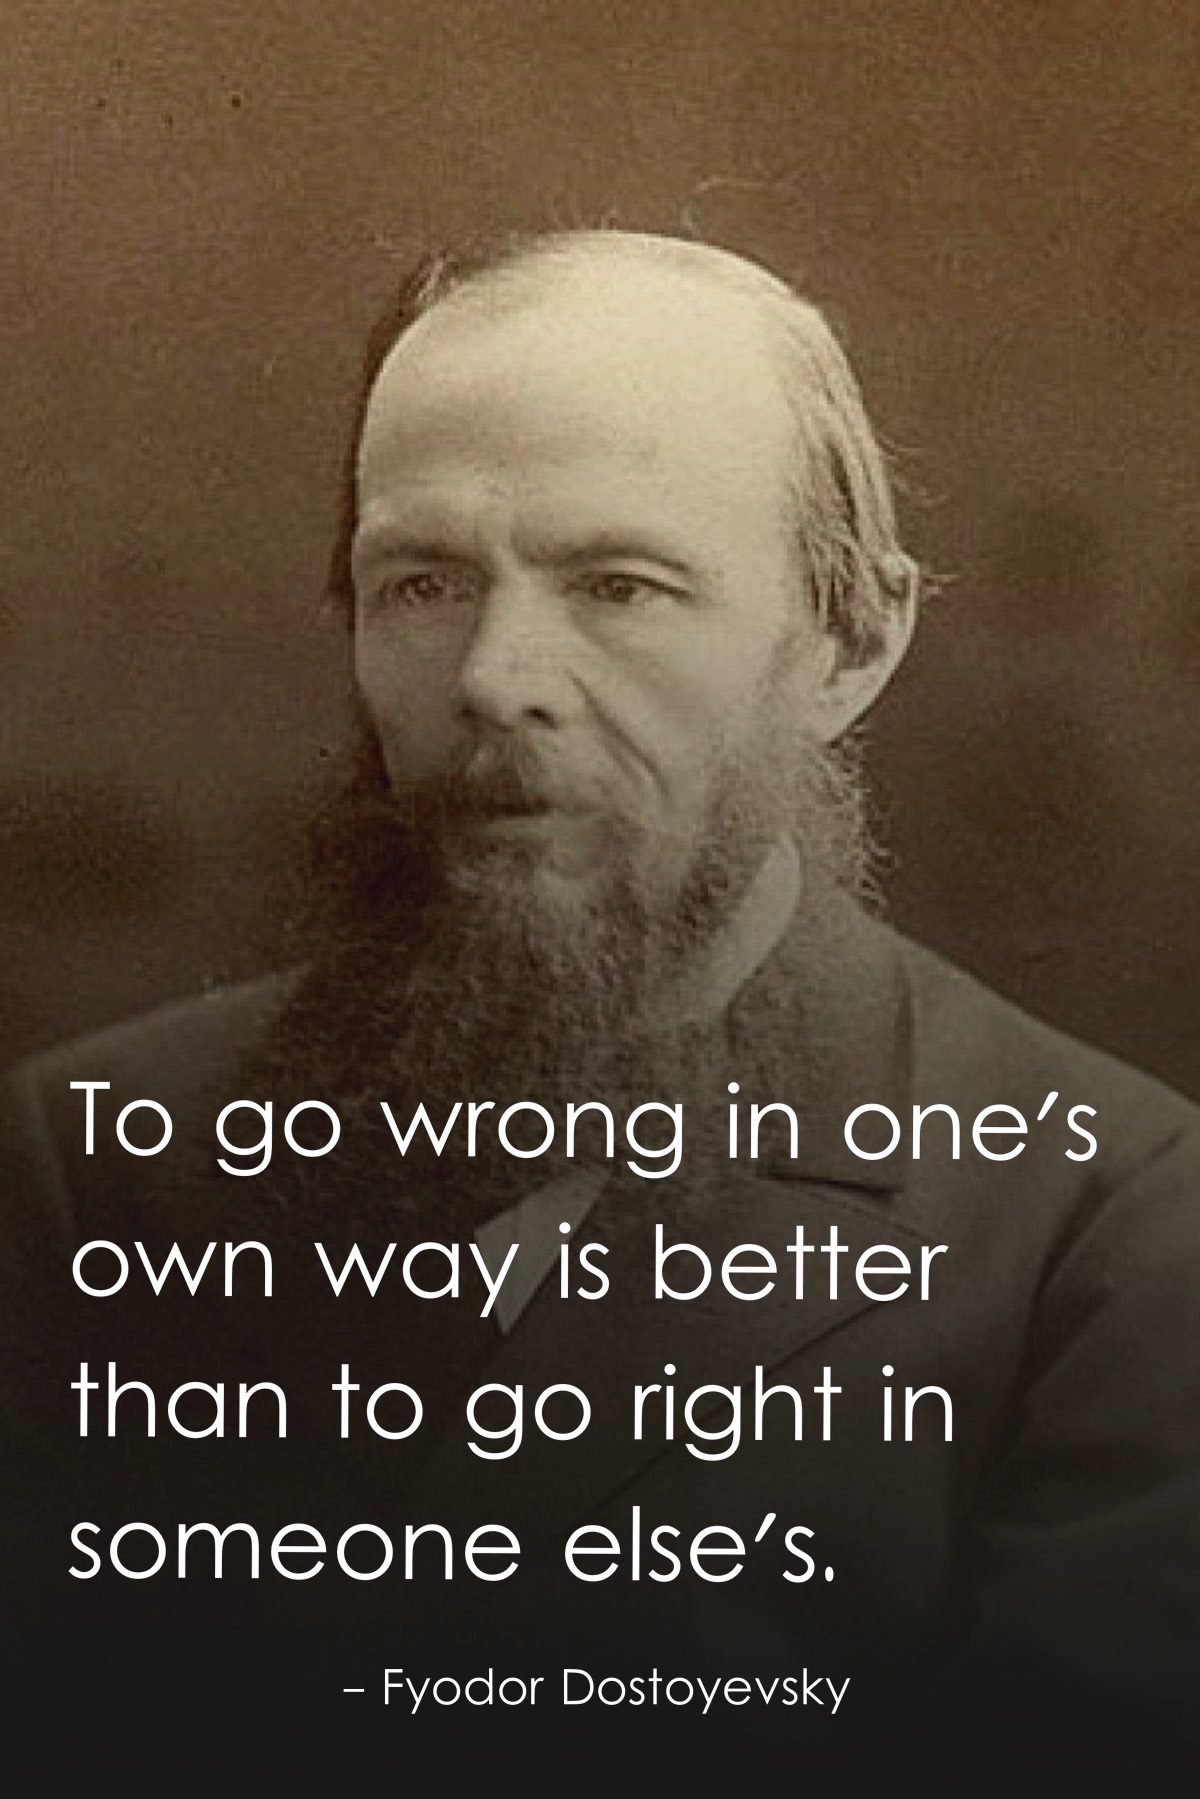 To go wrong in one's own way is better than to go right in someone else's.